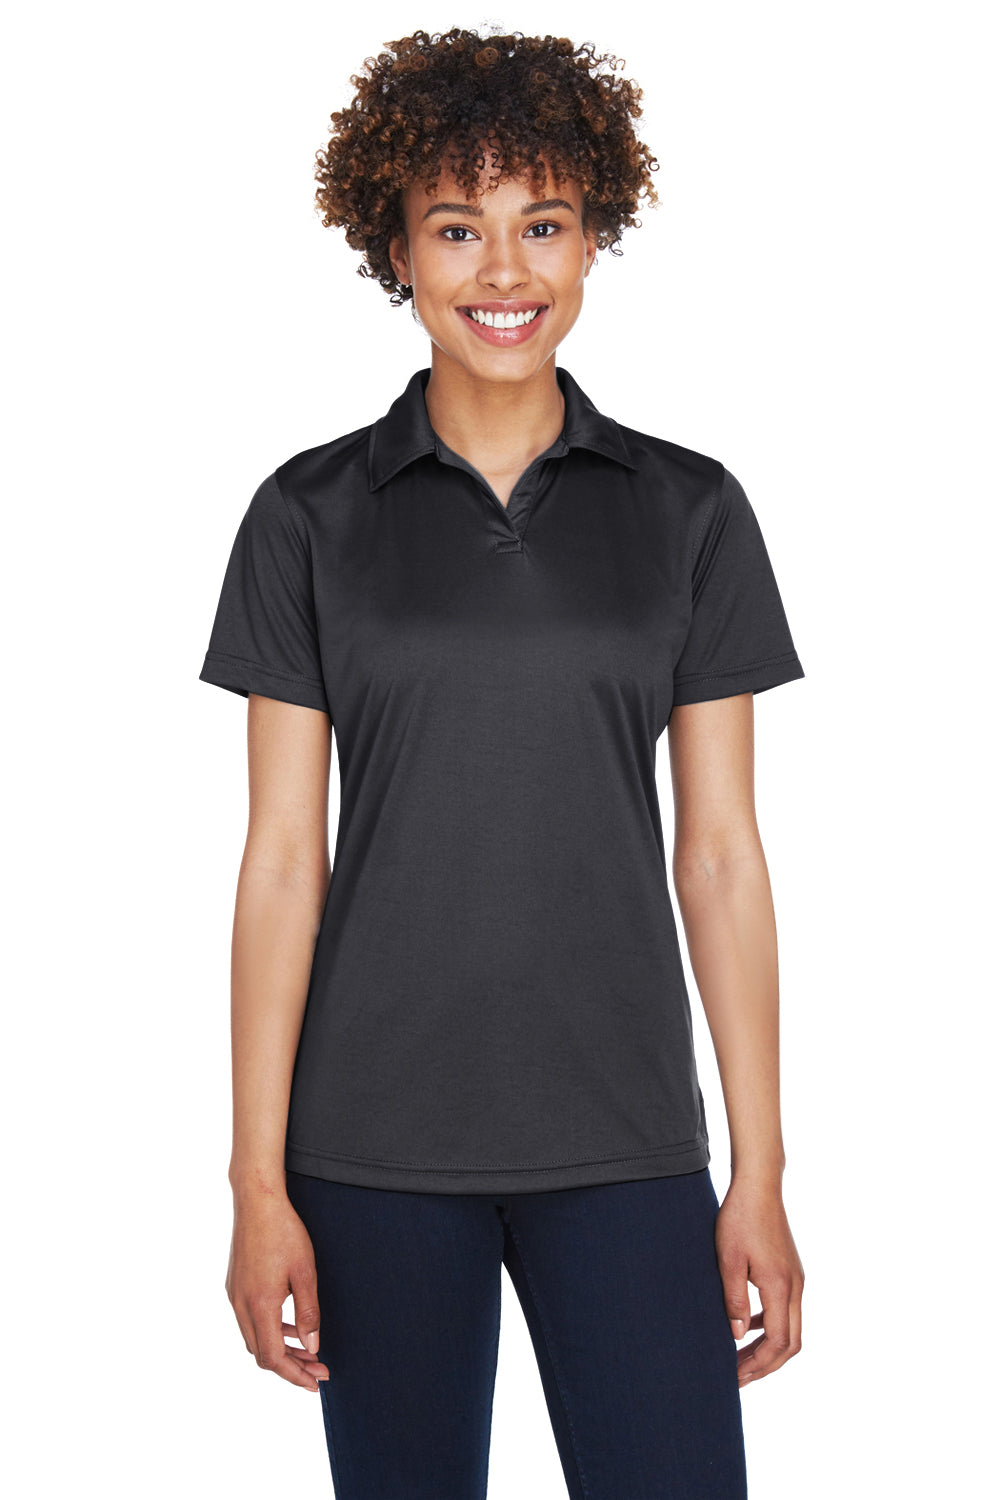 UltraClub 8425L Womens Cool & Dry Performance Moisture Wicking Short Sleeve Polo Shirt Black Front